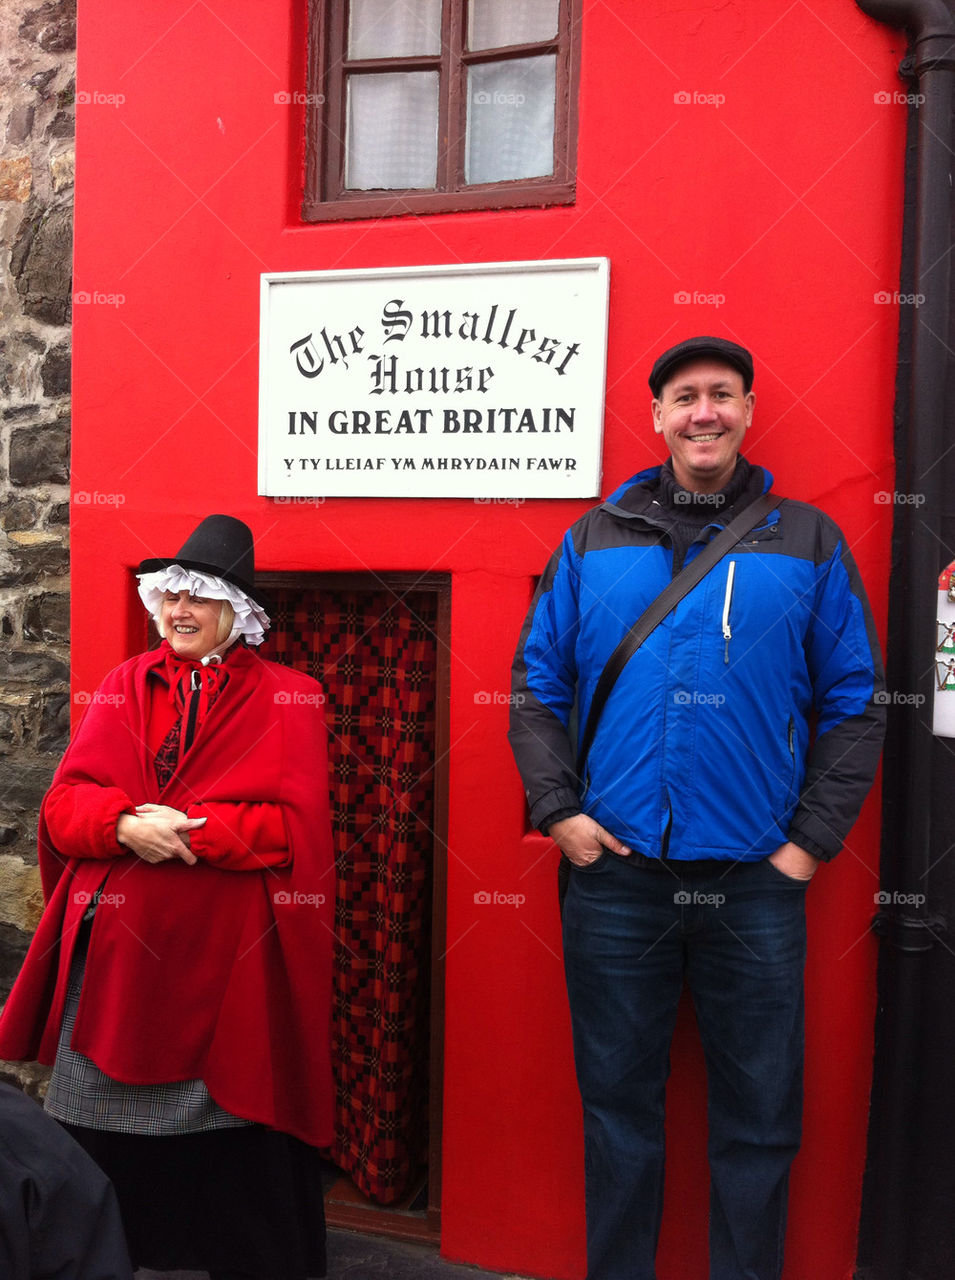 Conwy, Wales, smallest house in Great Britain